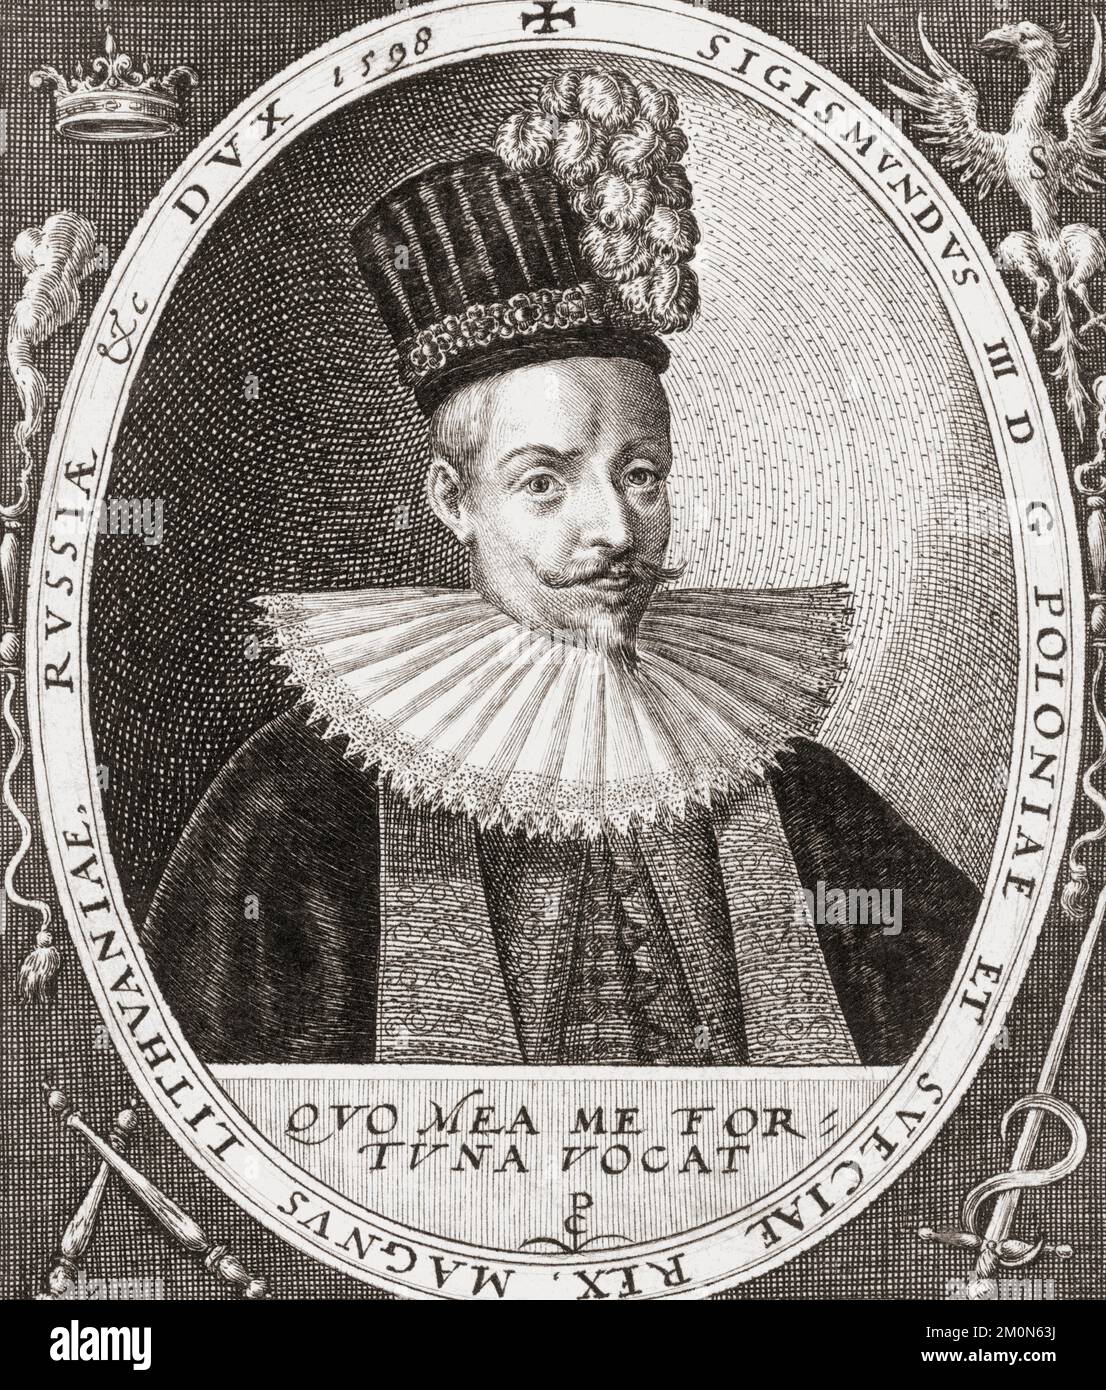 Sigismund III Vasa, 1566 - 1632.  King of Poland and Grand Duke of Lithuania 1587 to 1632.  As Sigismund he was King of Sweden and Grand Duke of Finland 1592 to 1599.  After a print by Crispijn van de Passe the Elder. Stock Photo